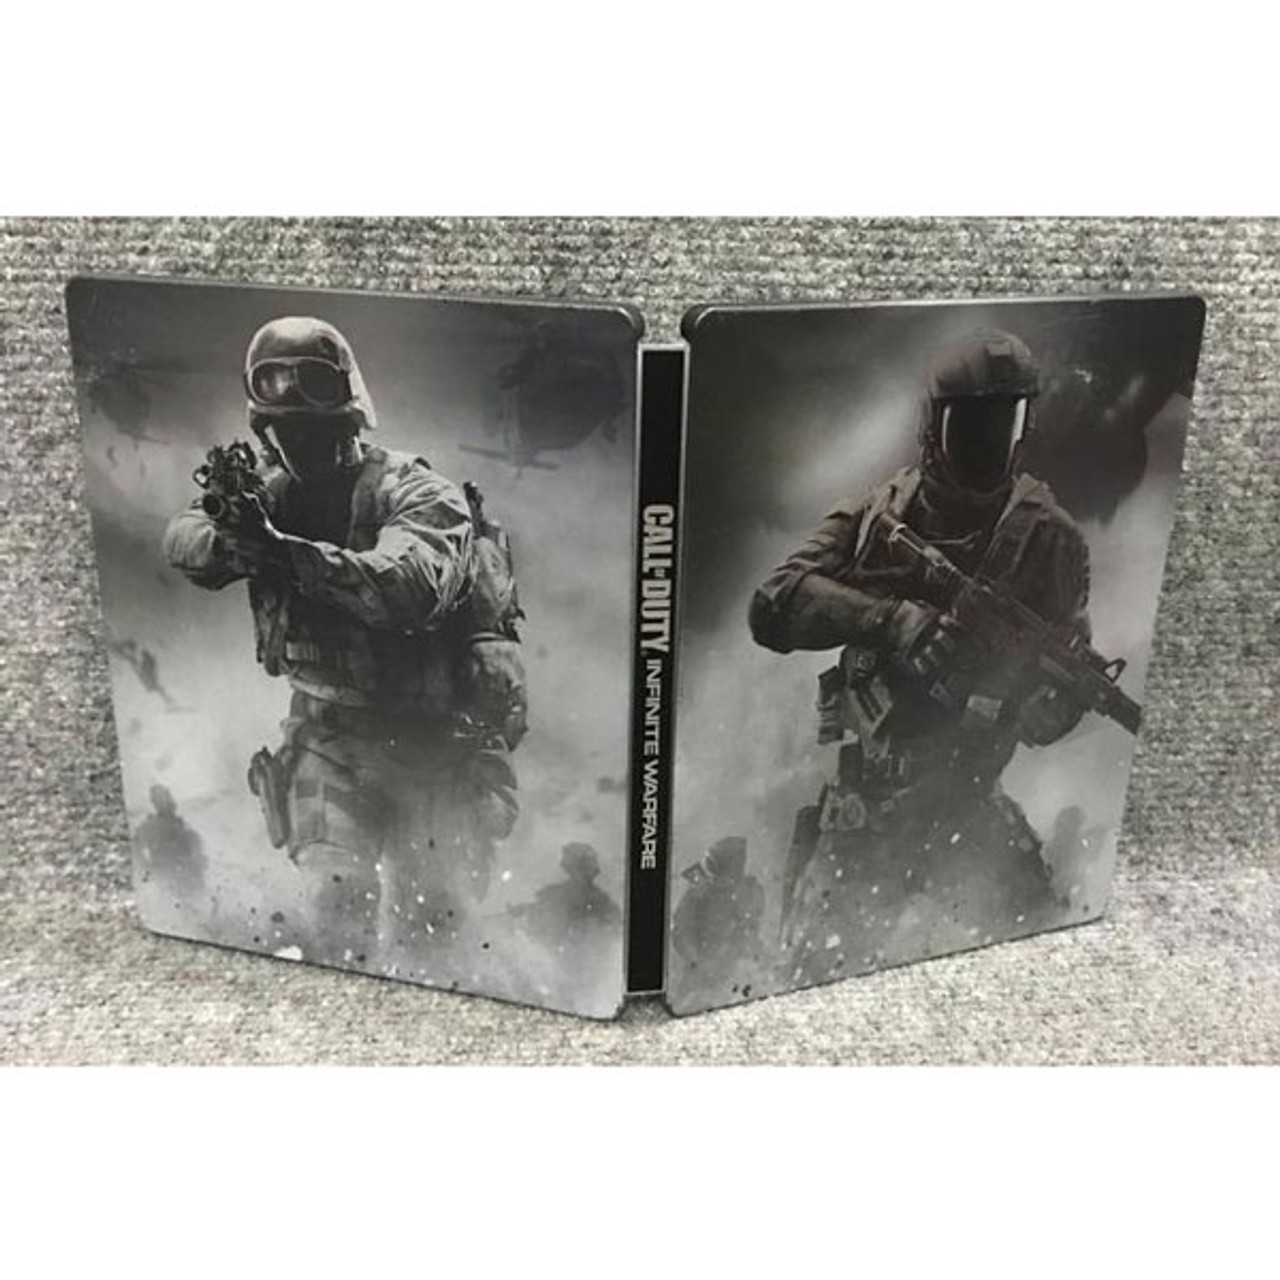 Call of Duty WWII Pro Edition Steelbook PS4 PlayStation 4